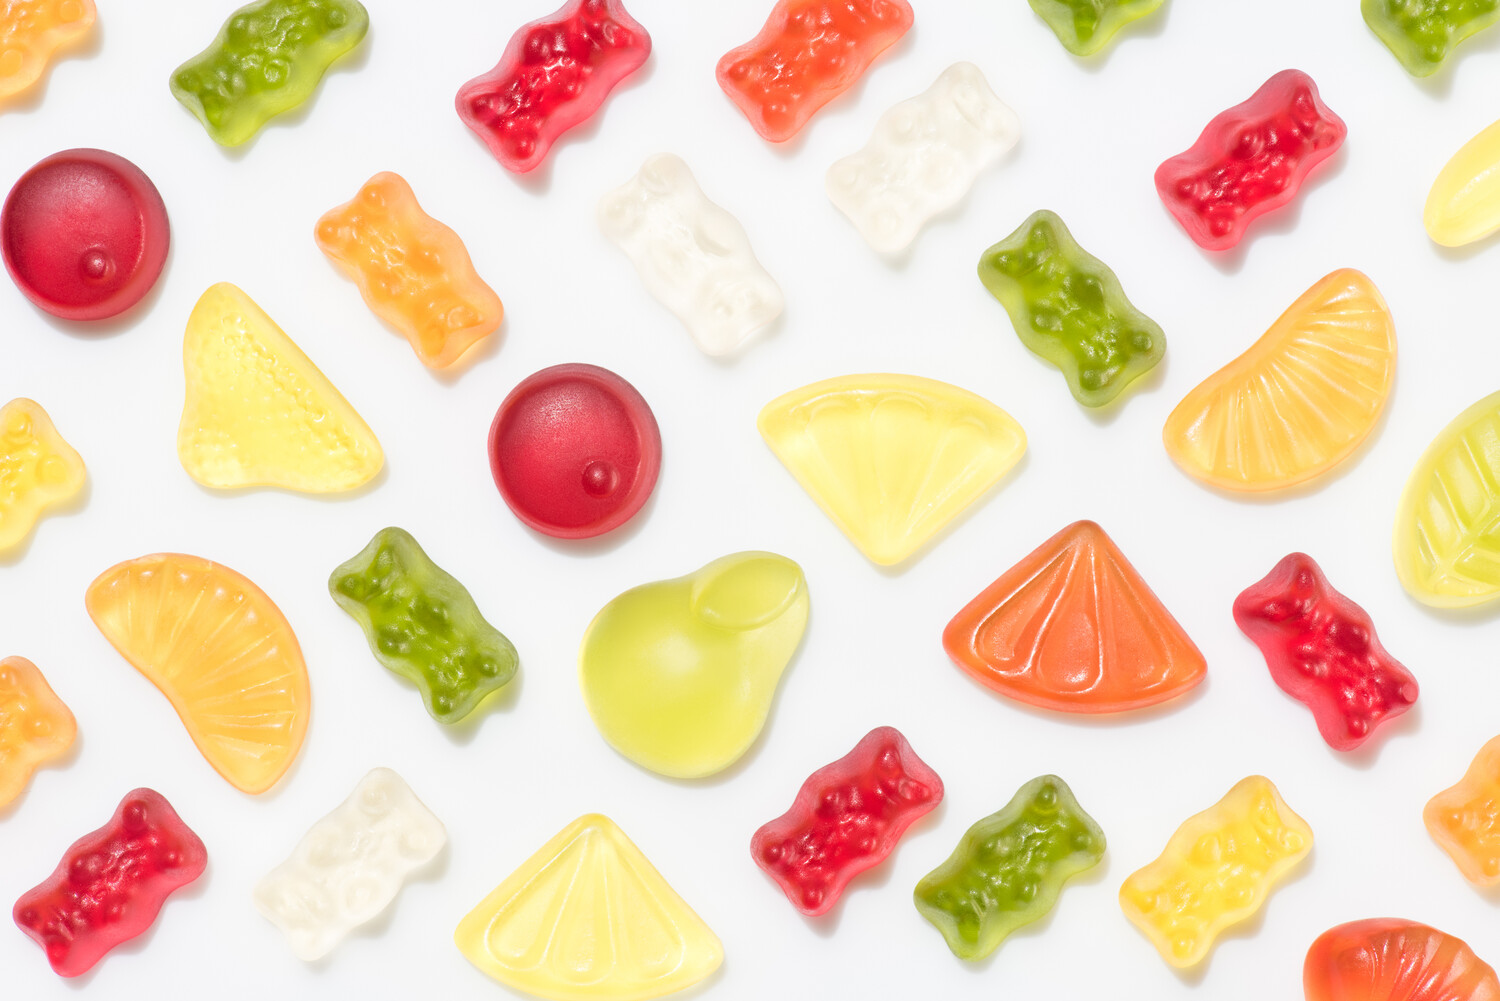 Optimized texture solutions for fruit gummies with less gelatin